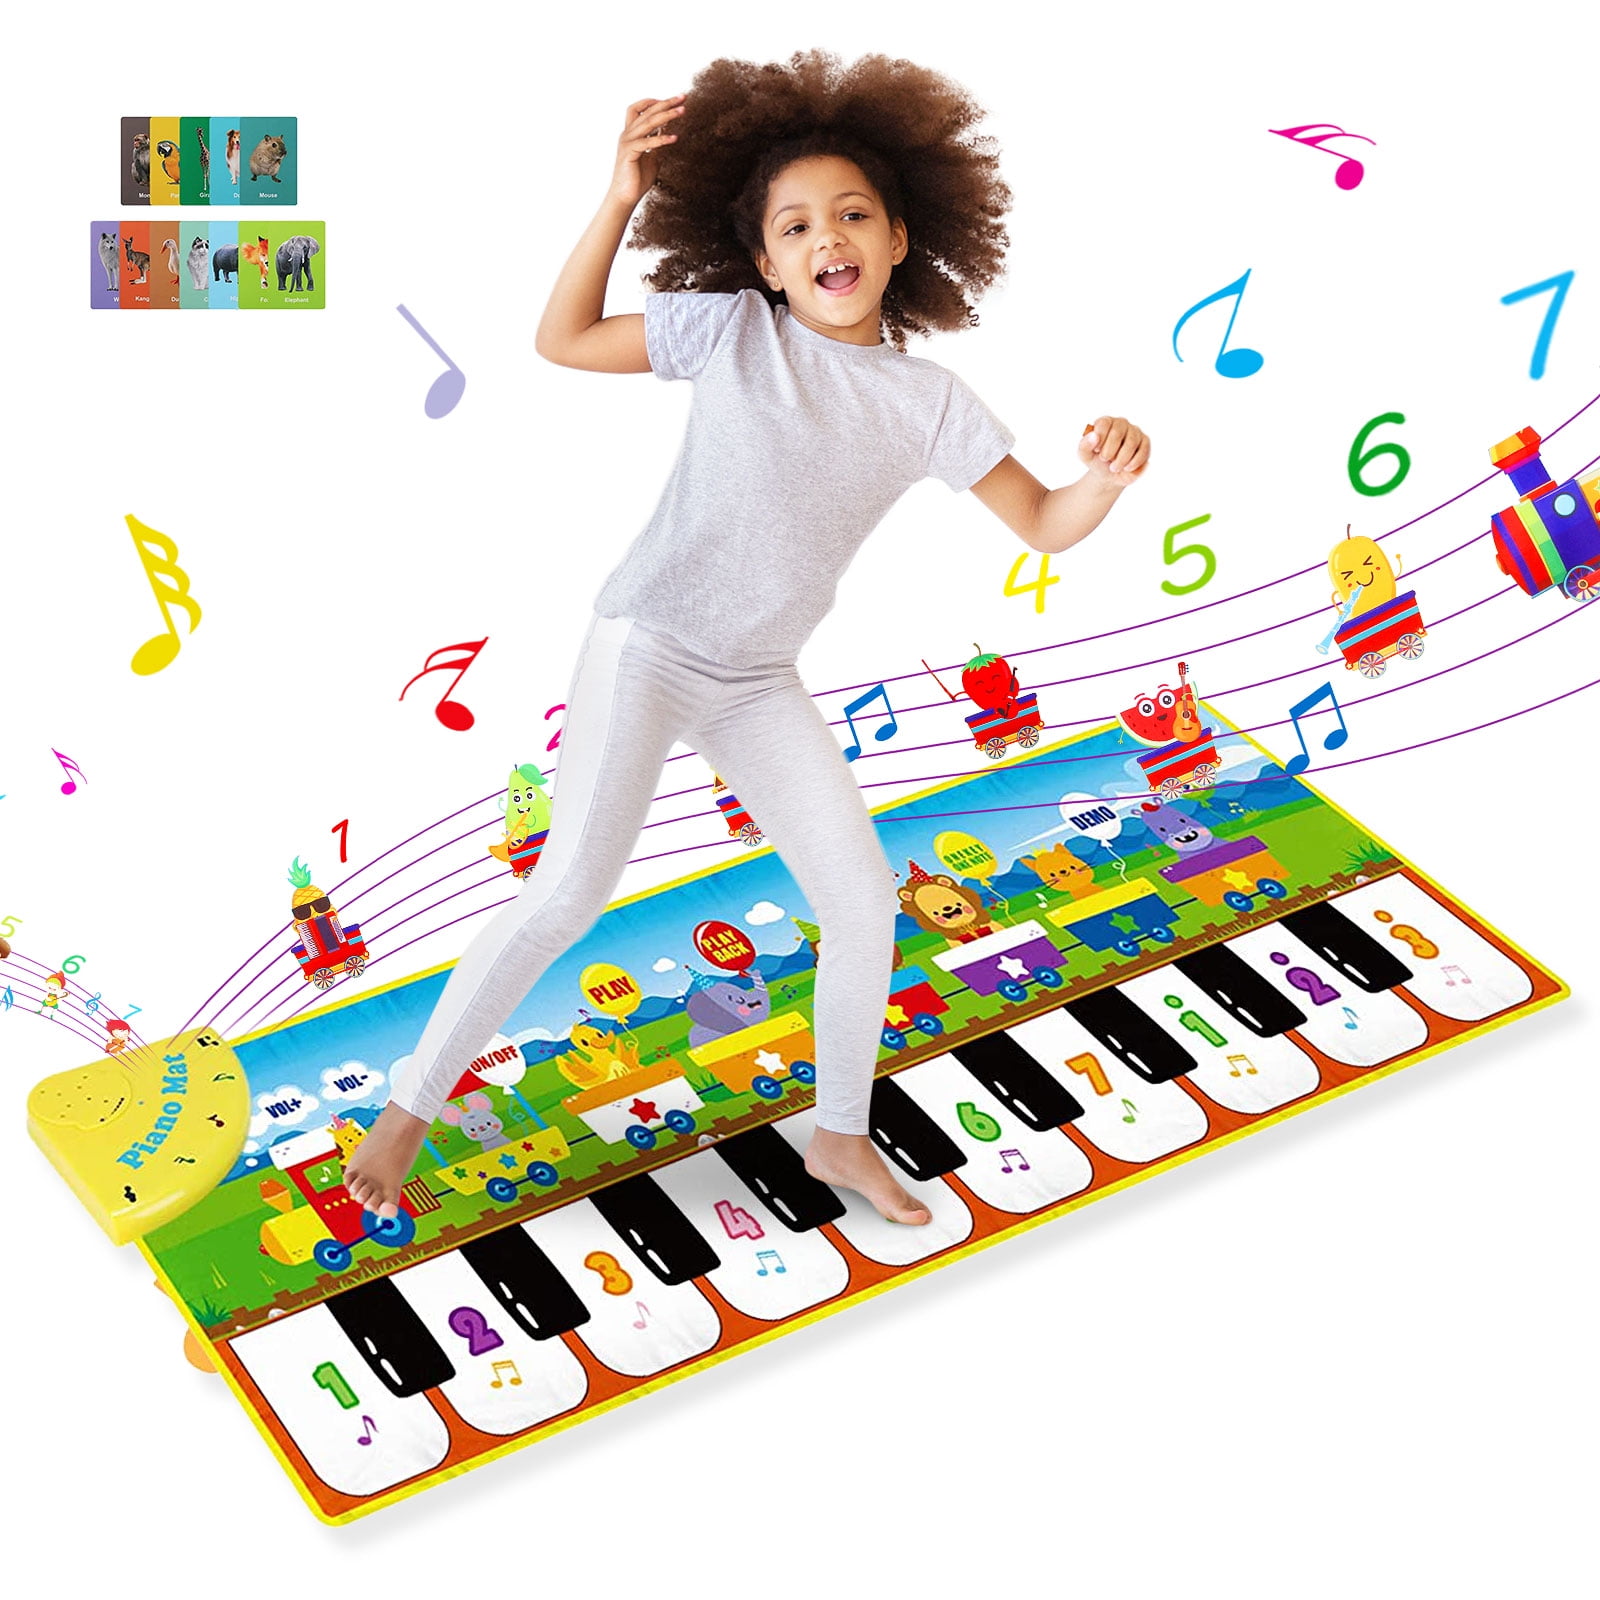 Ucradle Kids Piano Mat, Music Dance Mat with 28 Sounds, Children Touch Floor Keyboard Play Mats Animal Musical Playmat Toys Gifts for Toddlers Boys